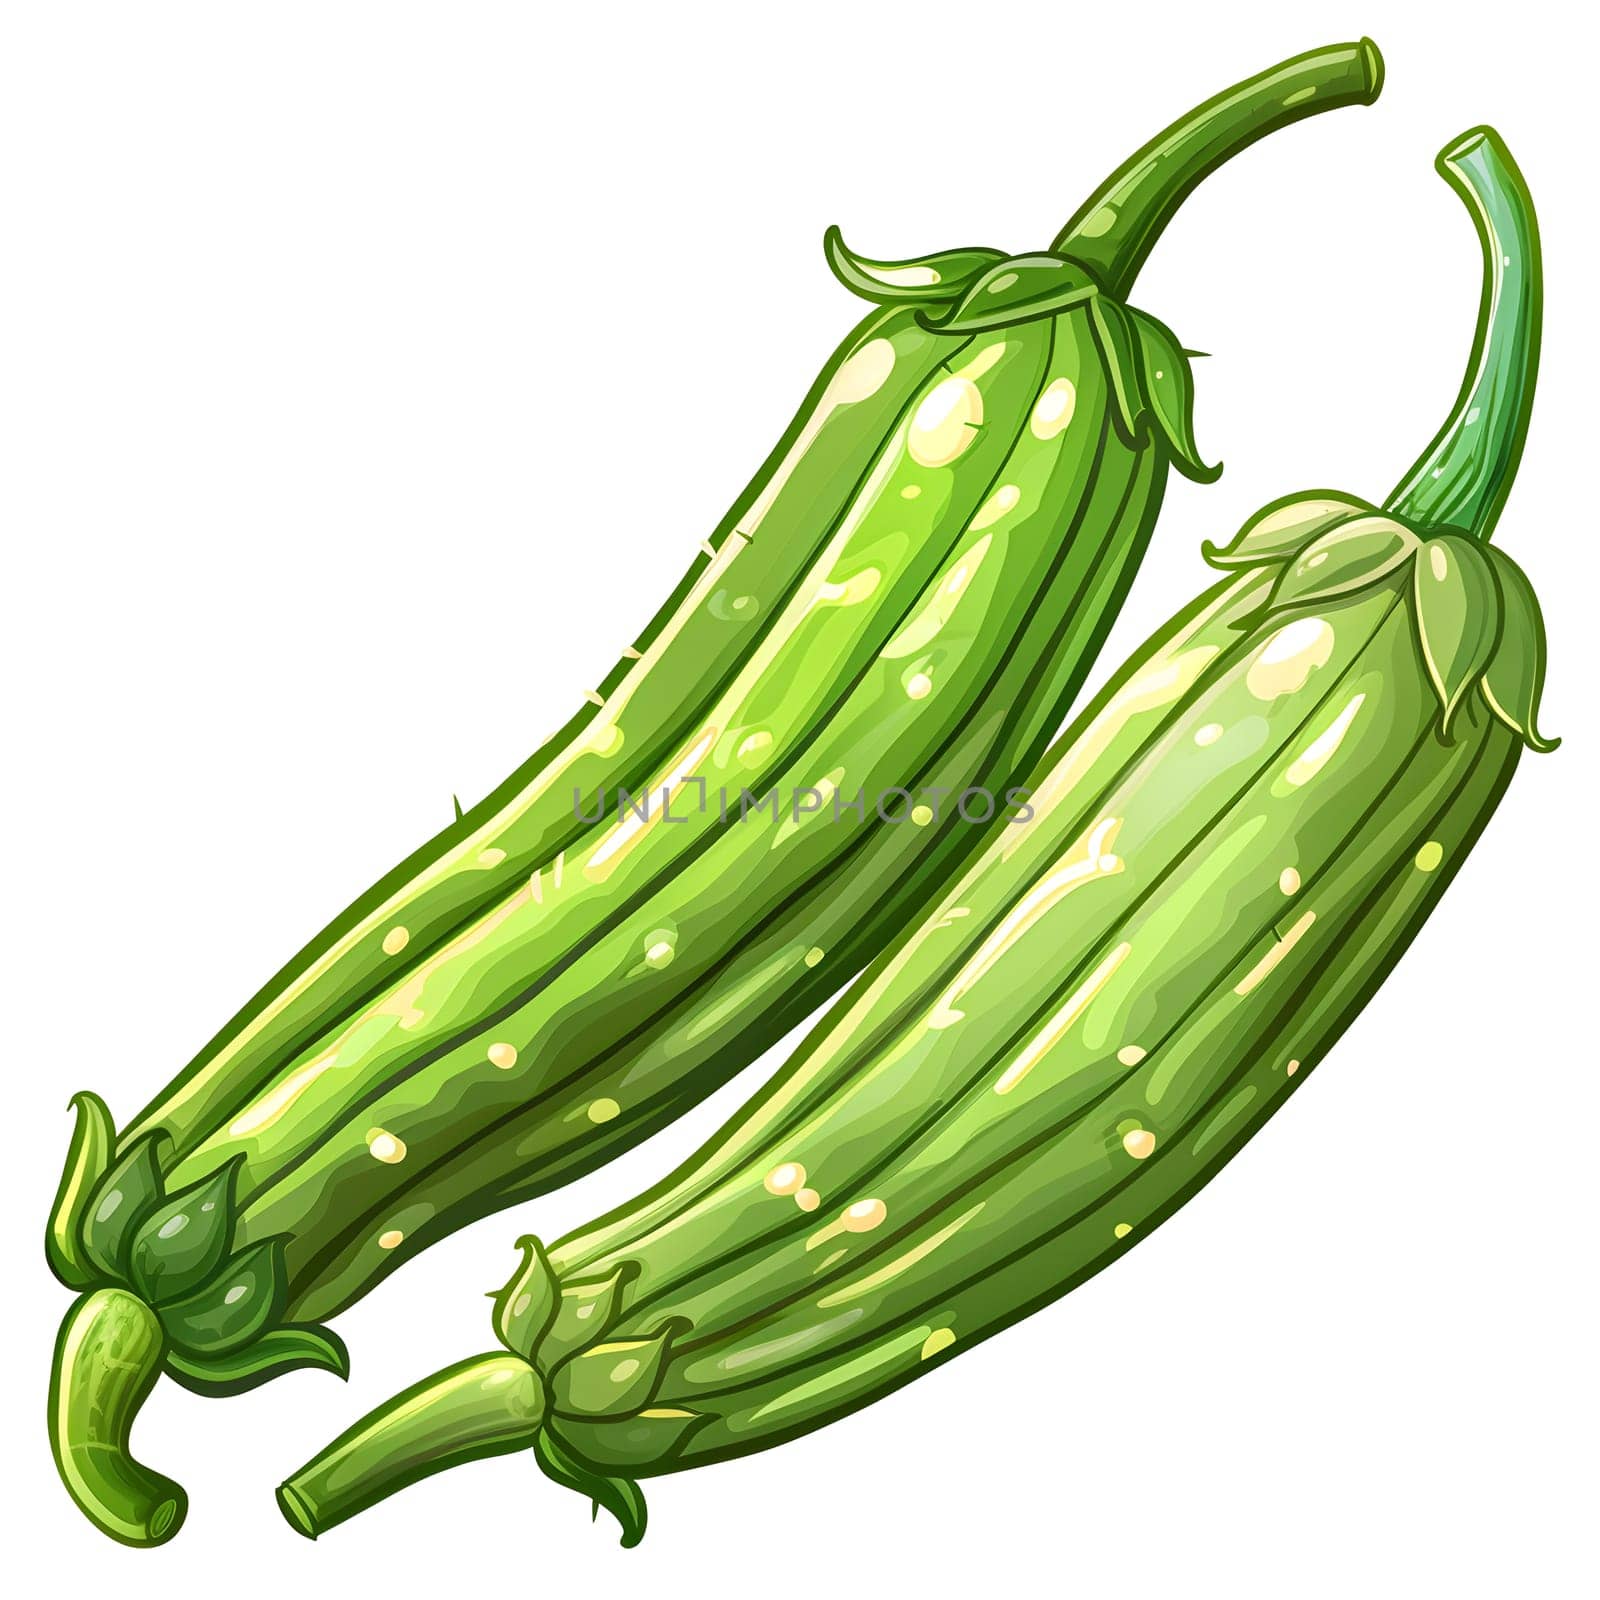 Illustration of two green zucchinis, a staple vegetable produce by Nadtochiy